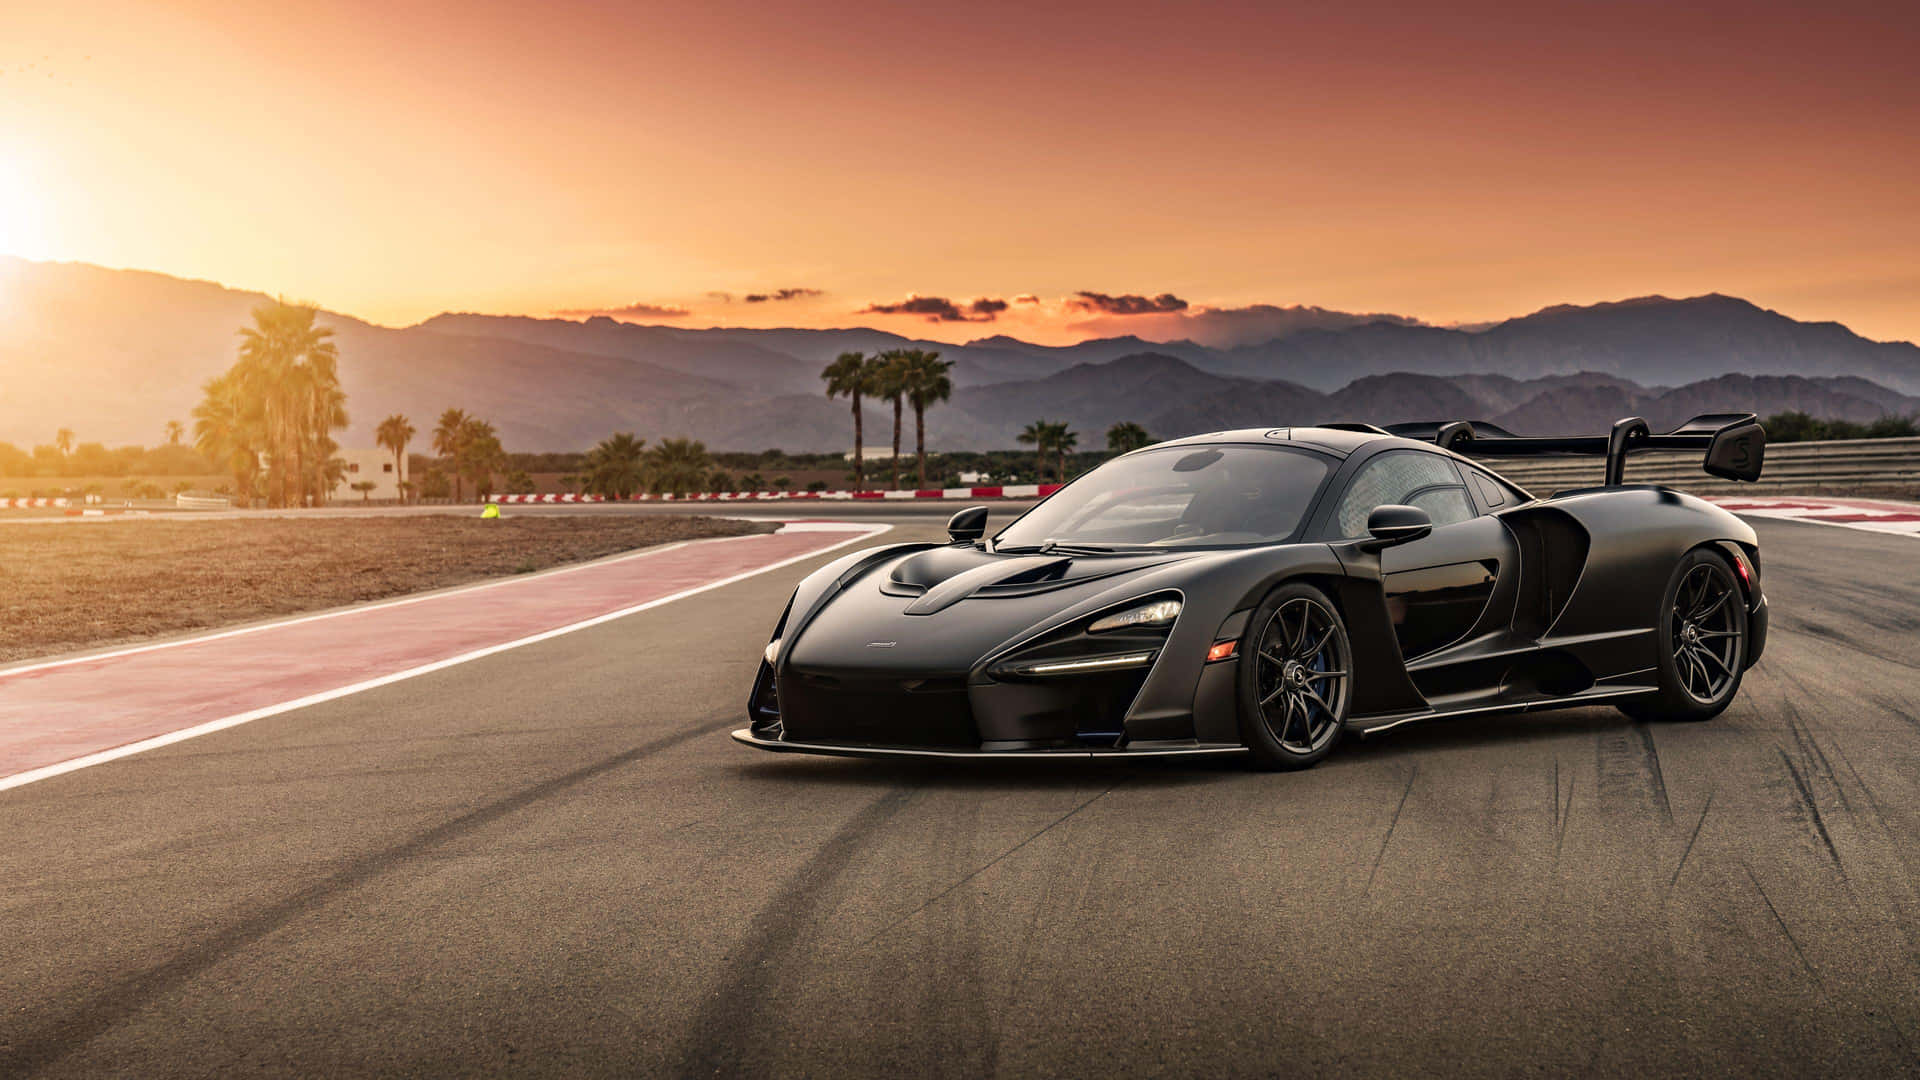 A Black Sports Car Driving On A Track At Sunset Wallpaper